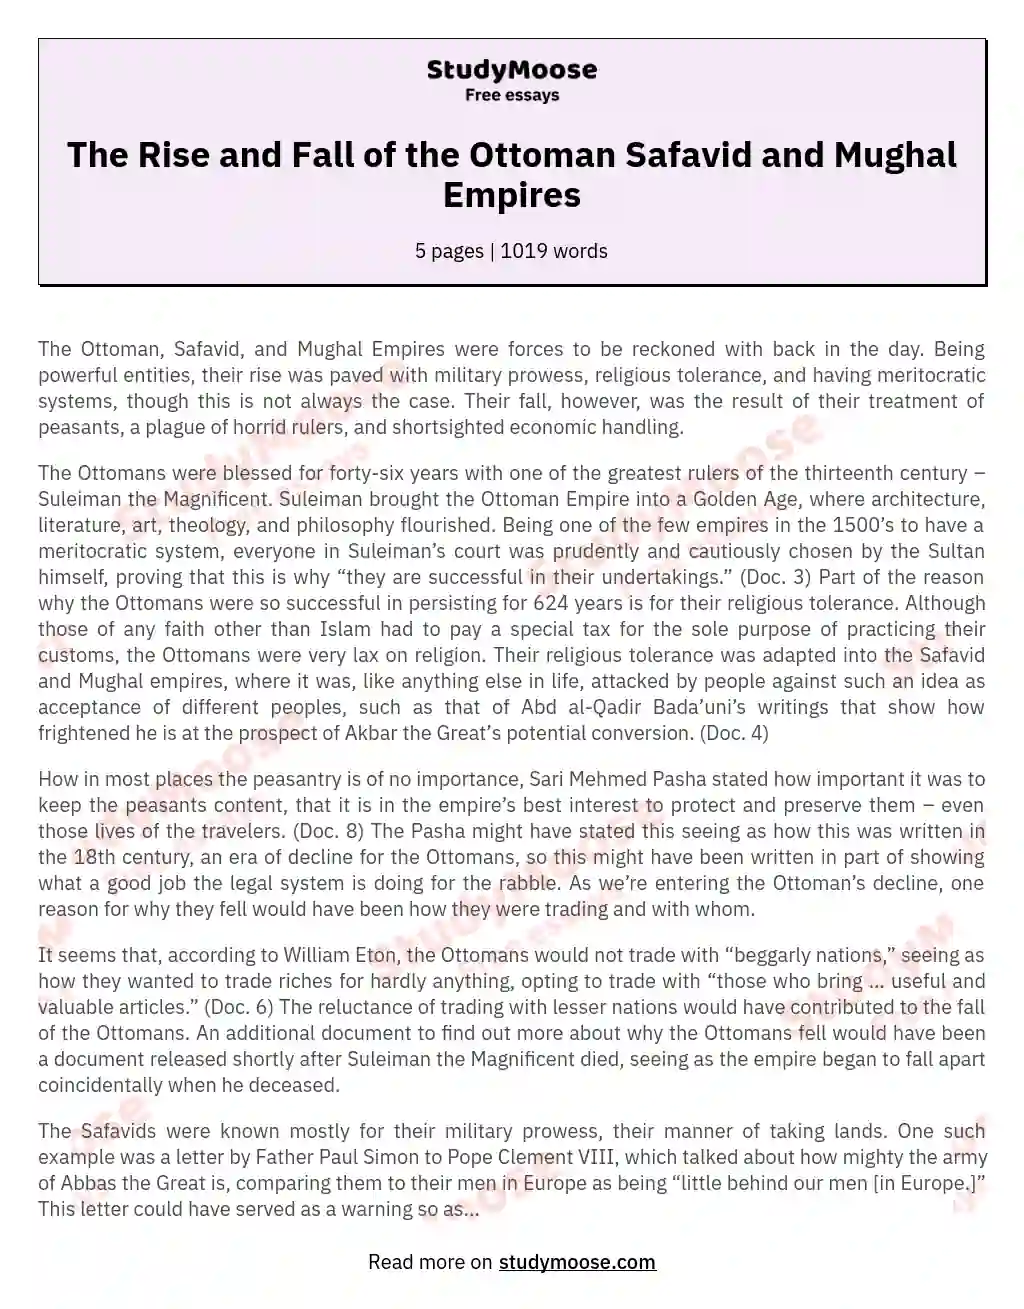 The Rise and Fall of the Ottoman Safavid and Mughal Empires